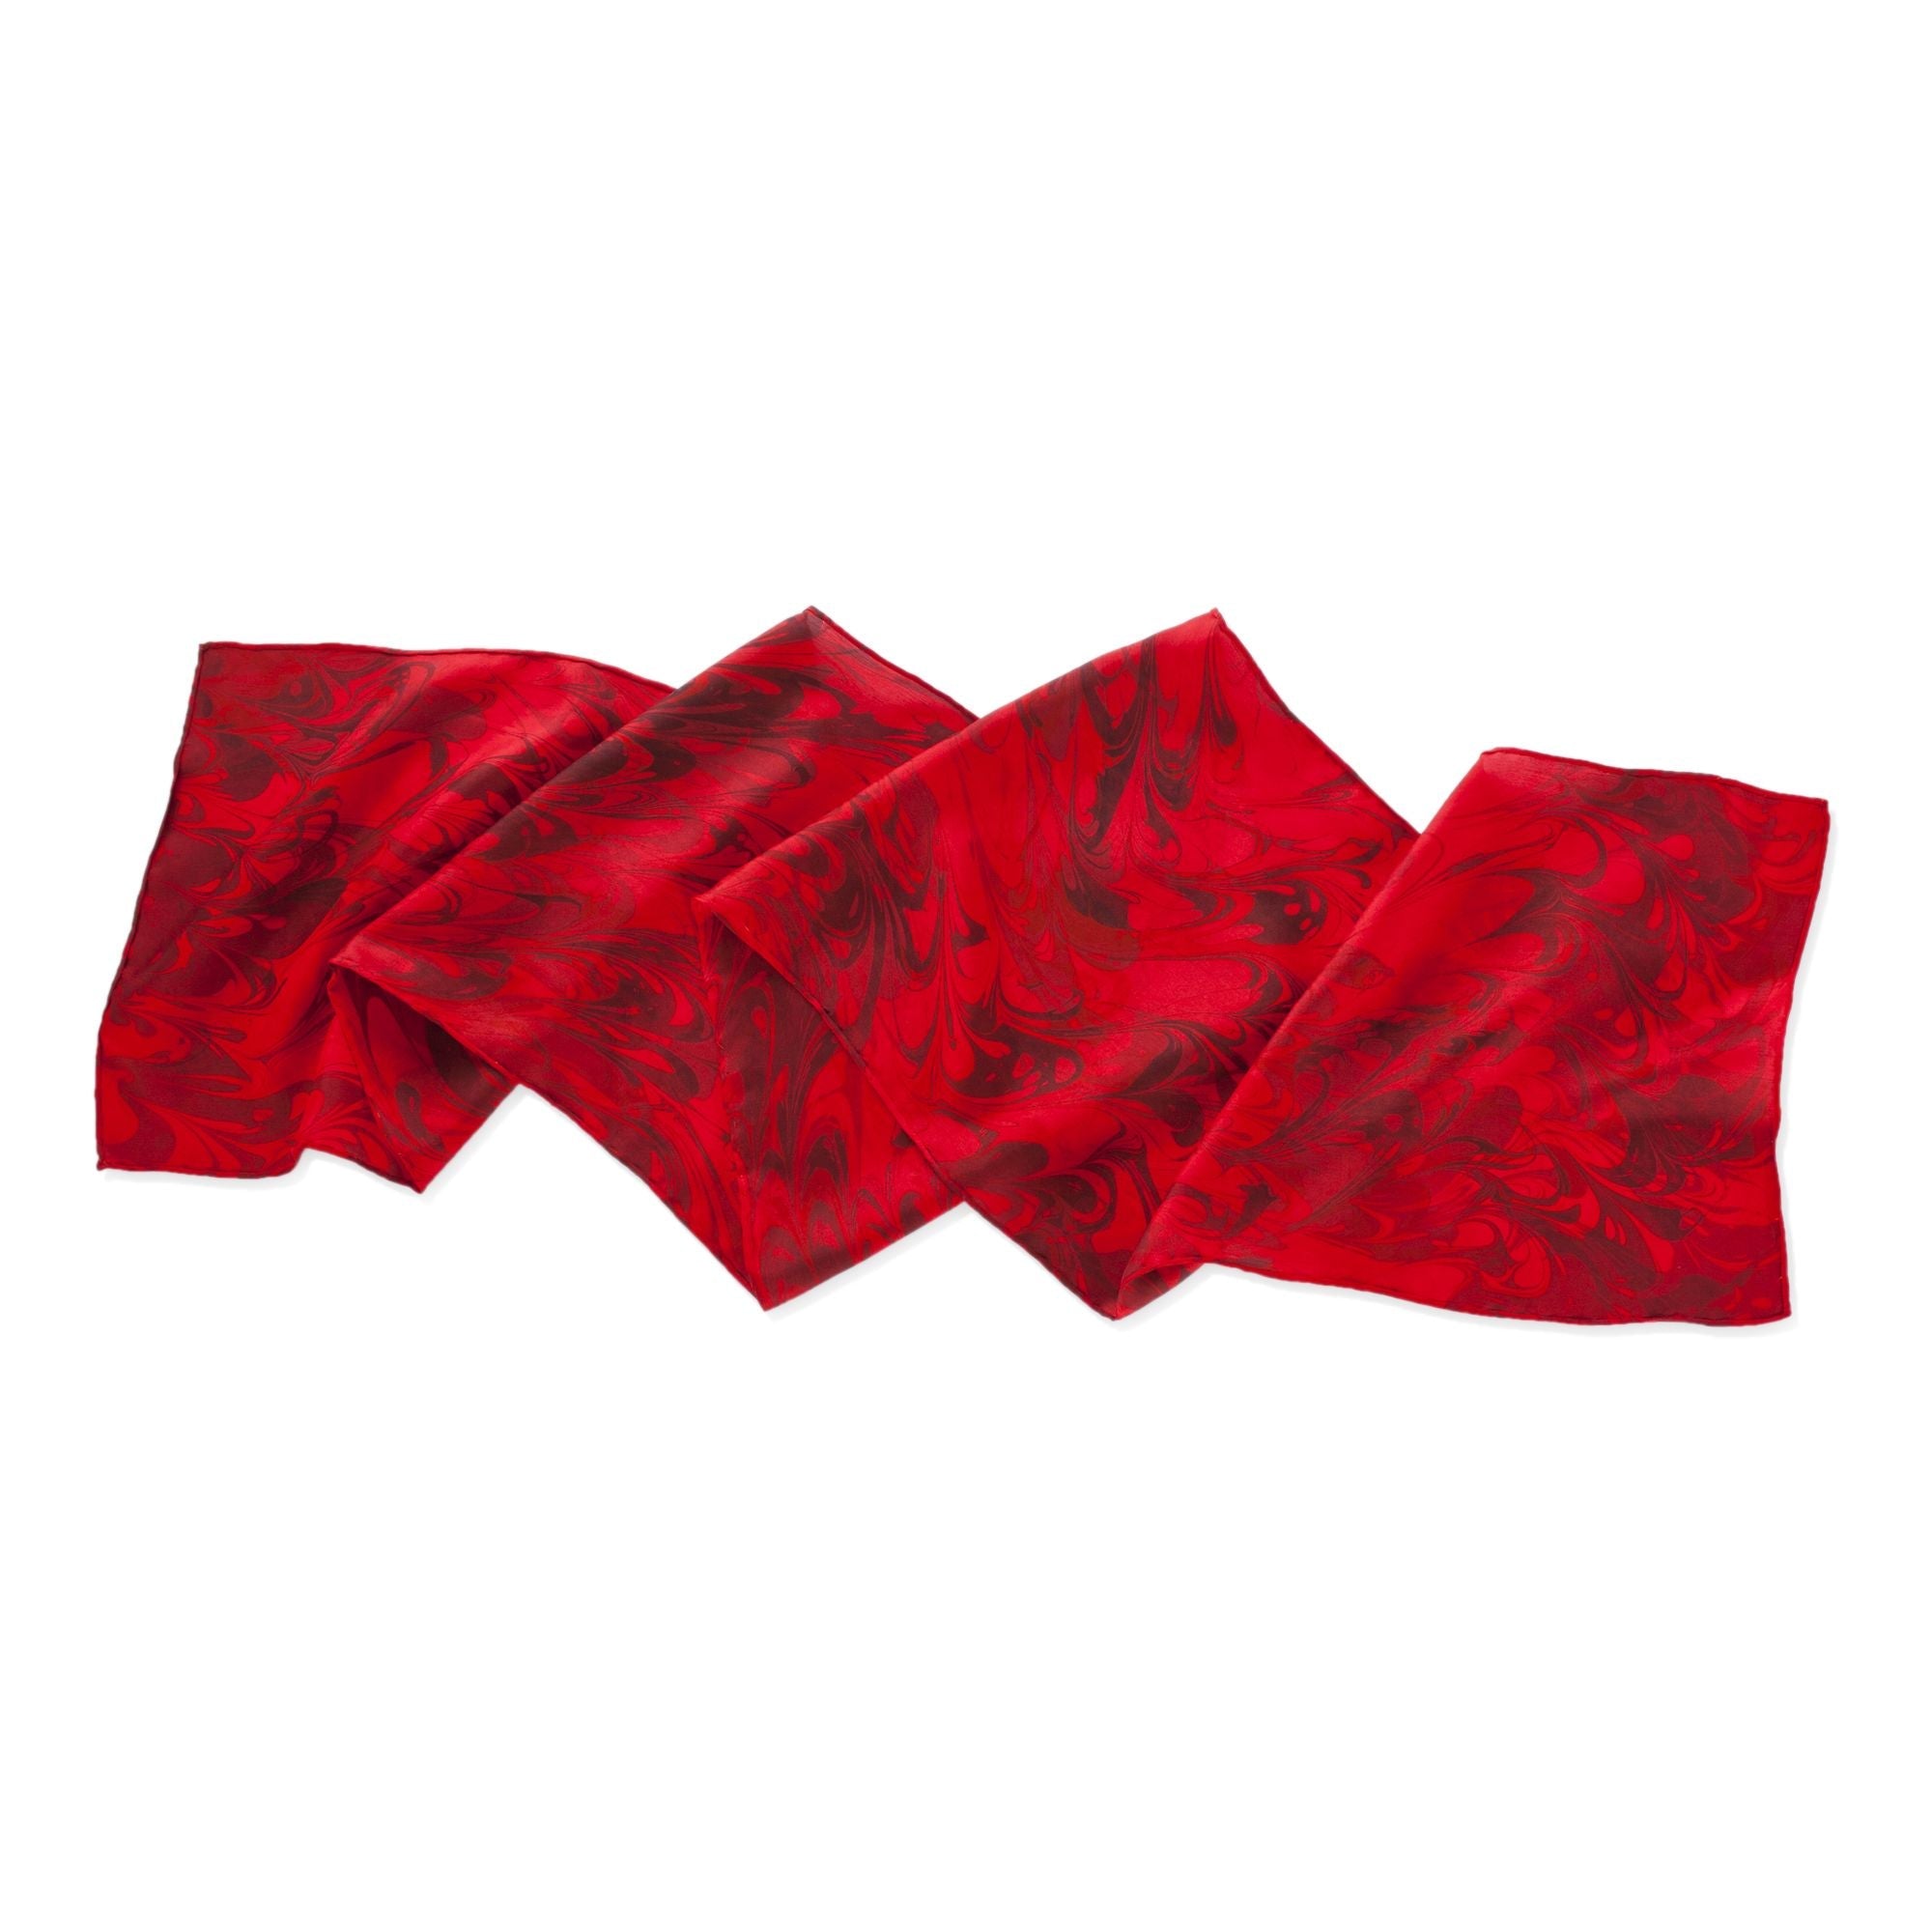 Red and Black Hand Marbled Silk Scarf